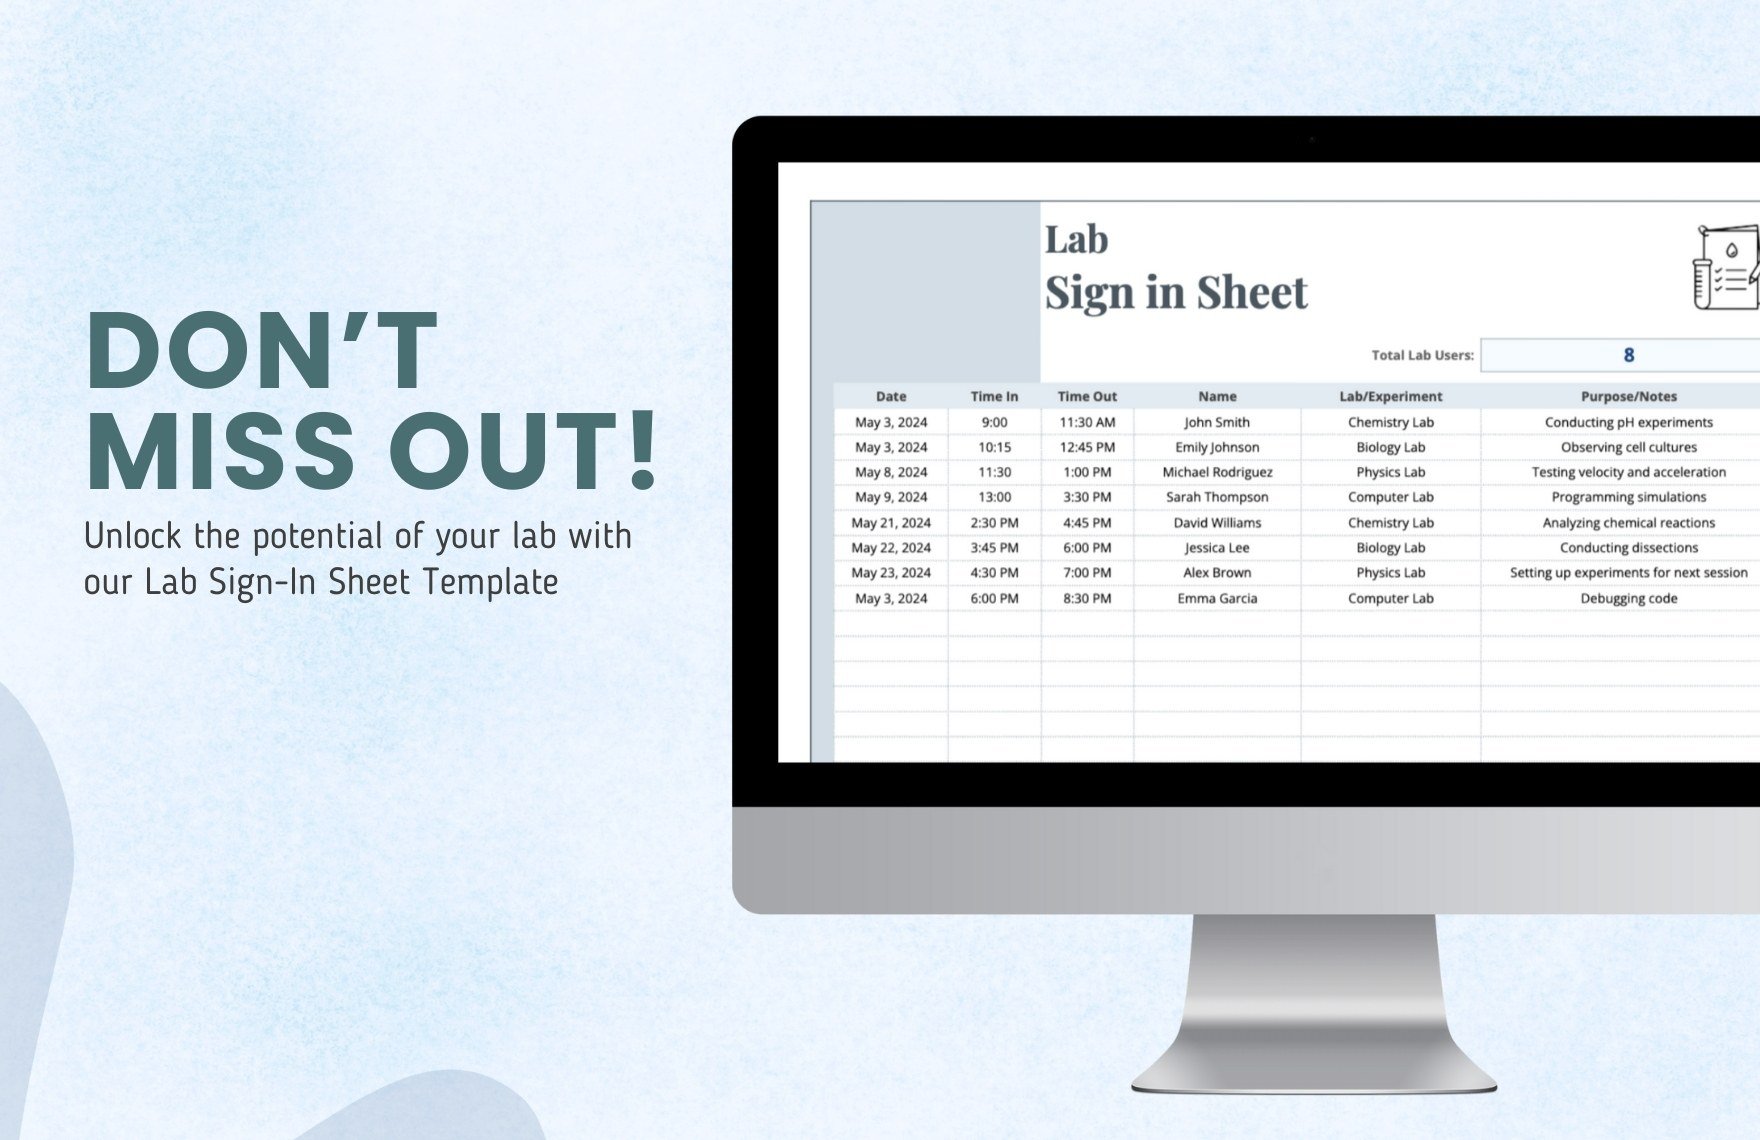 Lab Sign in Sheet Template